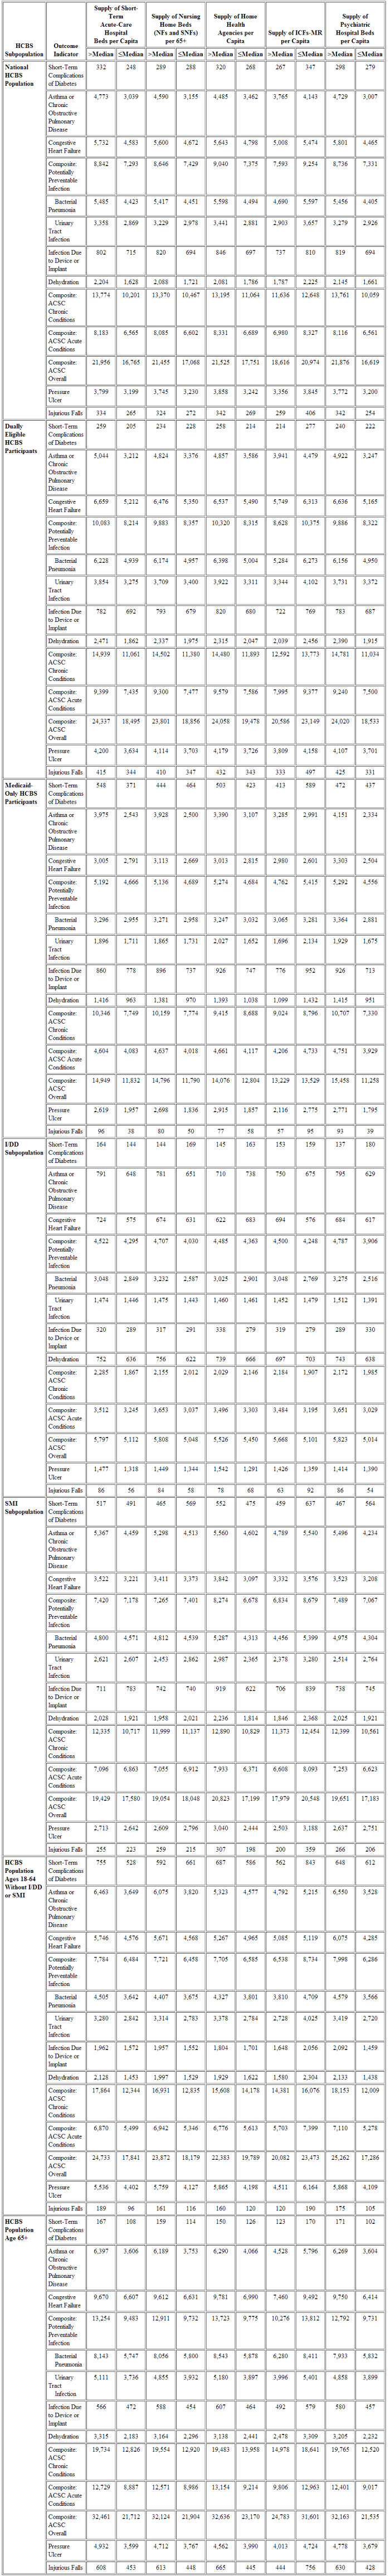 Table 14B: Outcome Indicators by State Supply of Health Care Providers